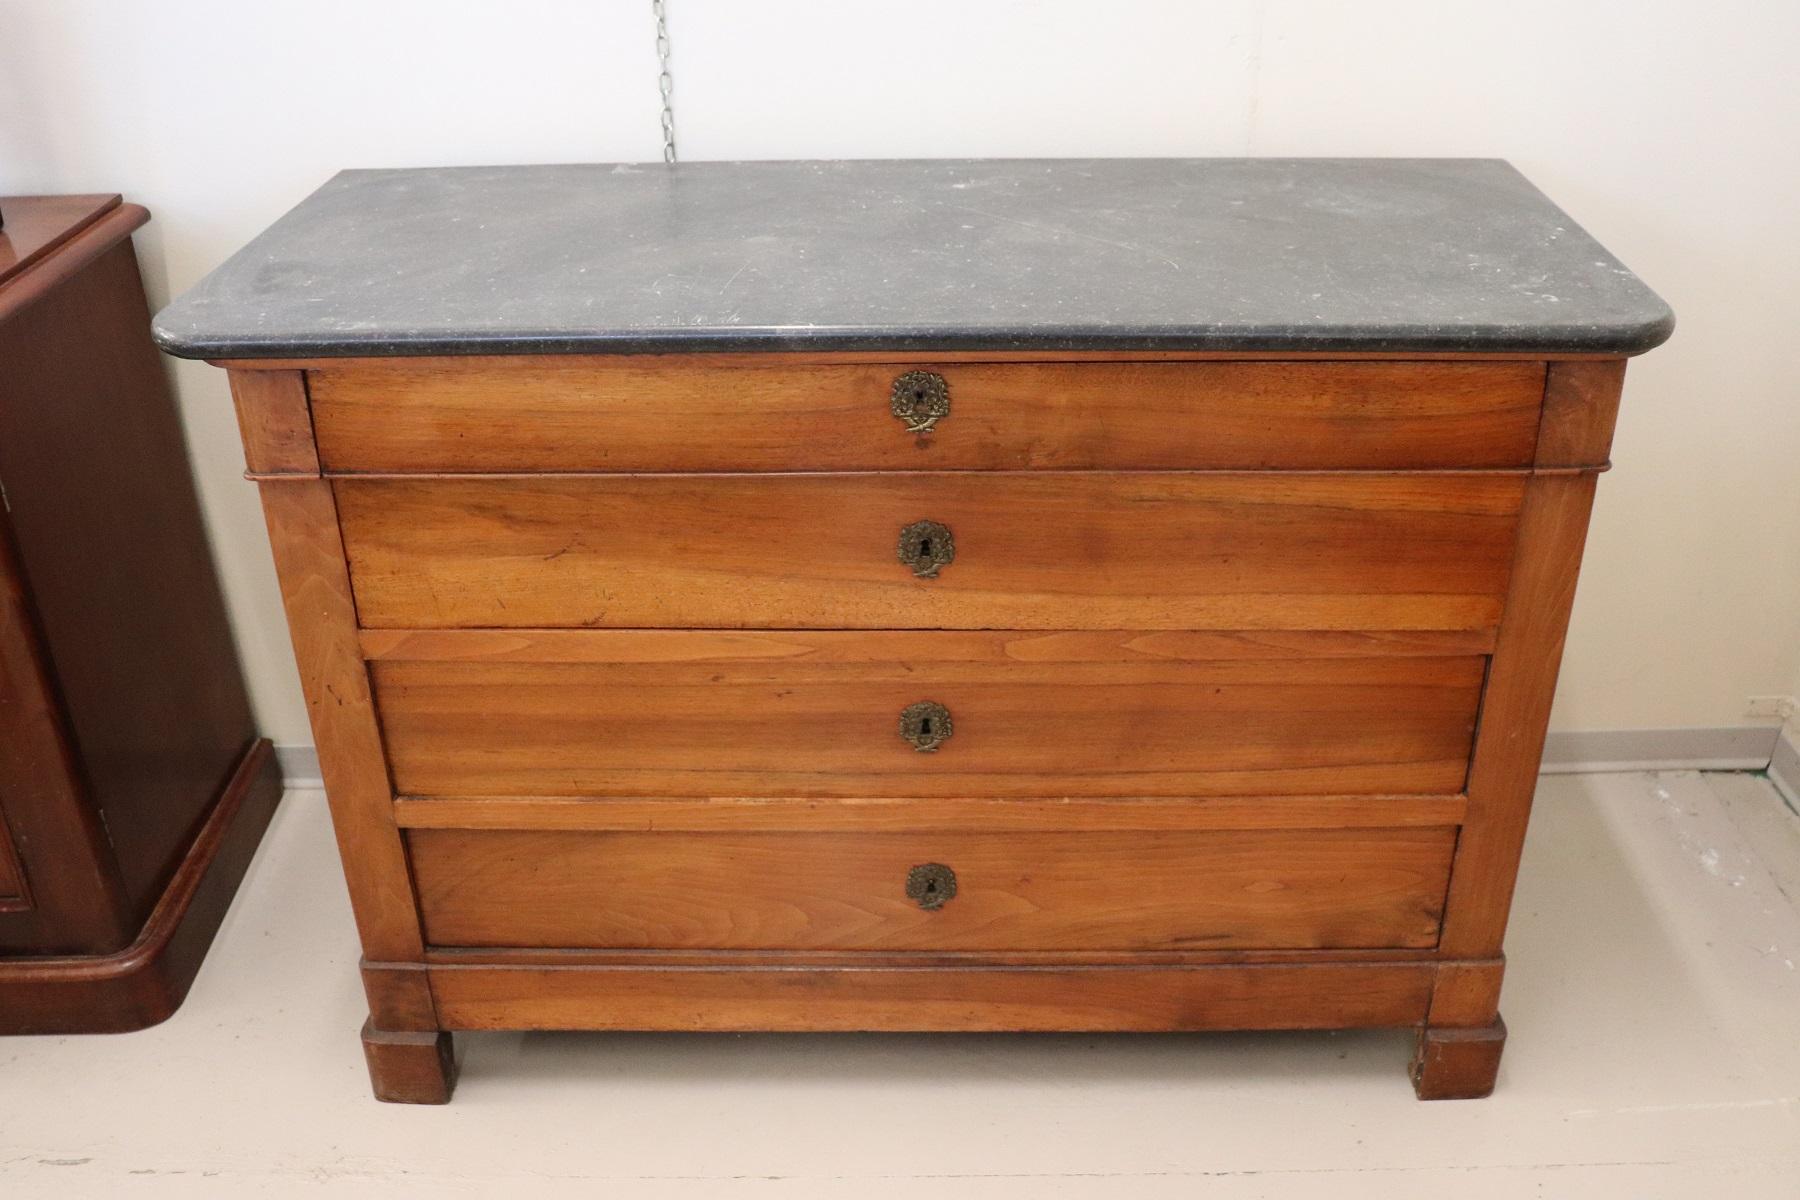 Rare and fine quality Italian Louis Philippe antique dresser, 1850s. Precious solid walnut wood. Equipped with four comfortable drawers. Top in fine Italian dark gray marble. Very simple and linear, perfect even in a modern furniture. Used but